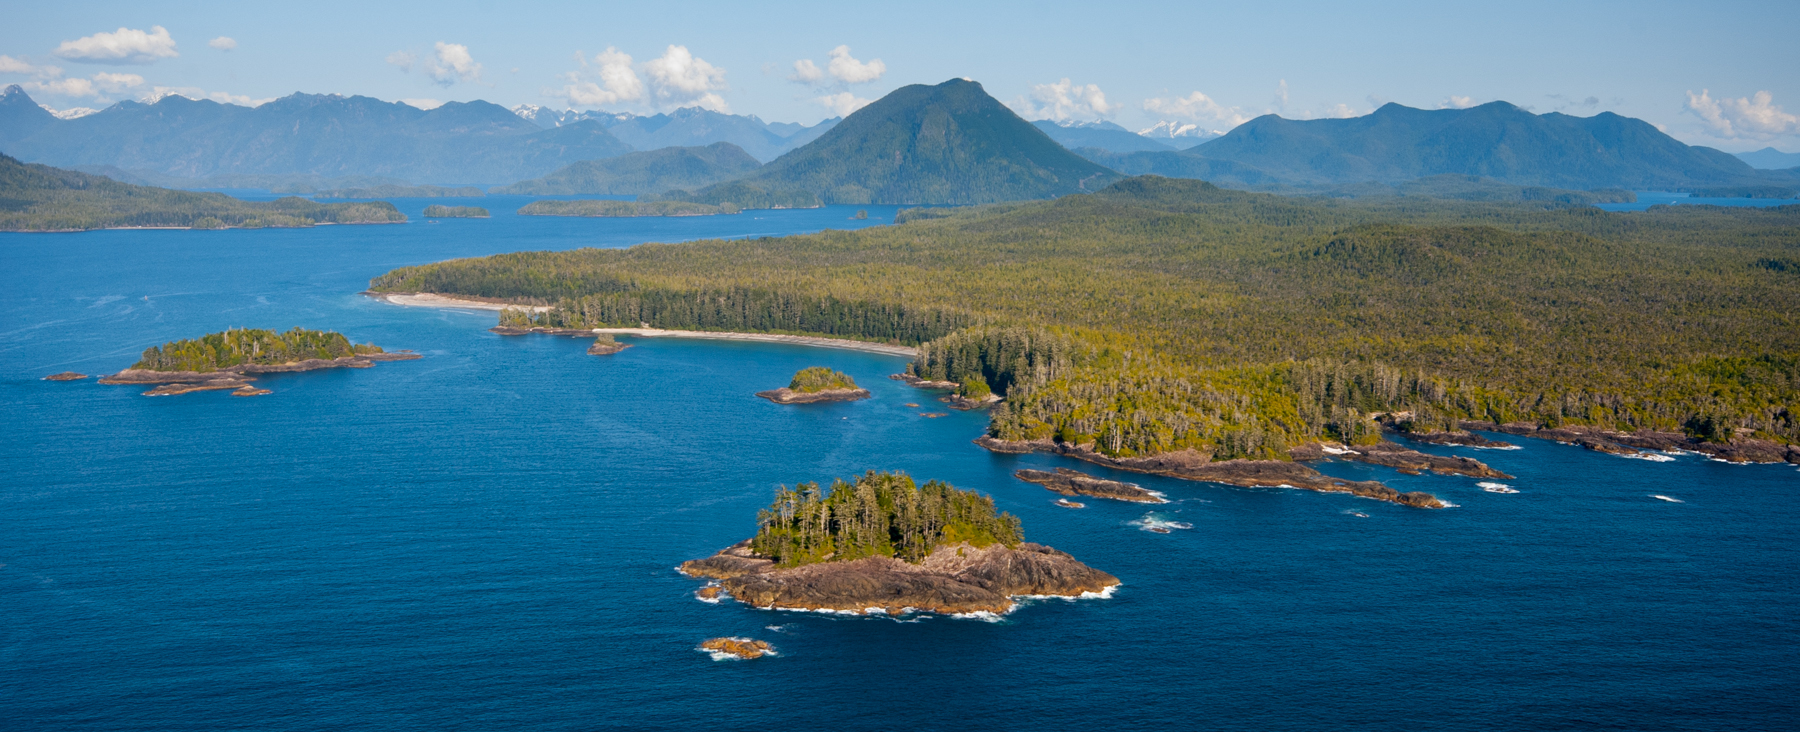 Aerial view of Clayoquot Sound landscape.